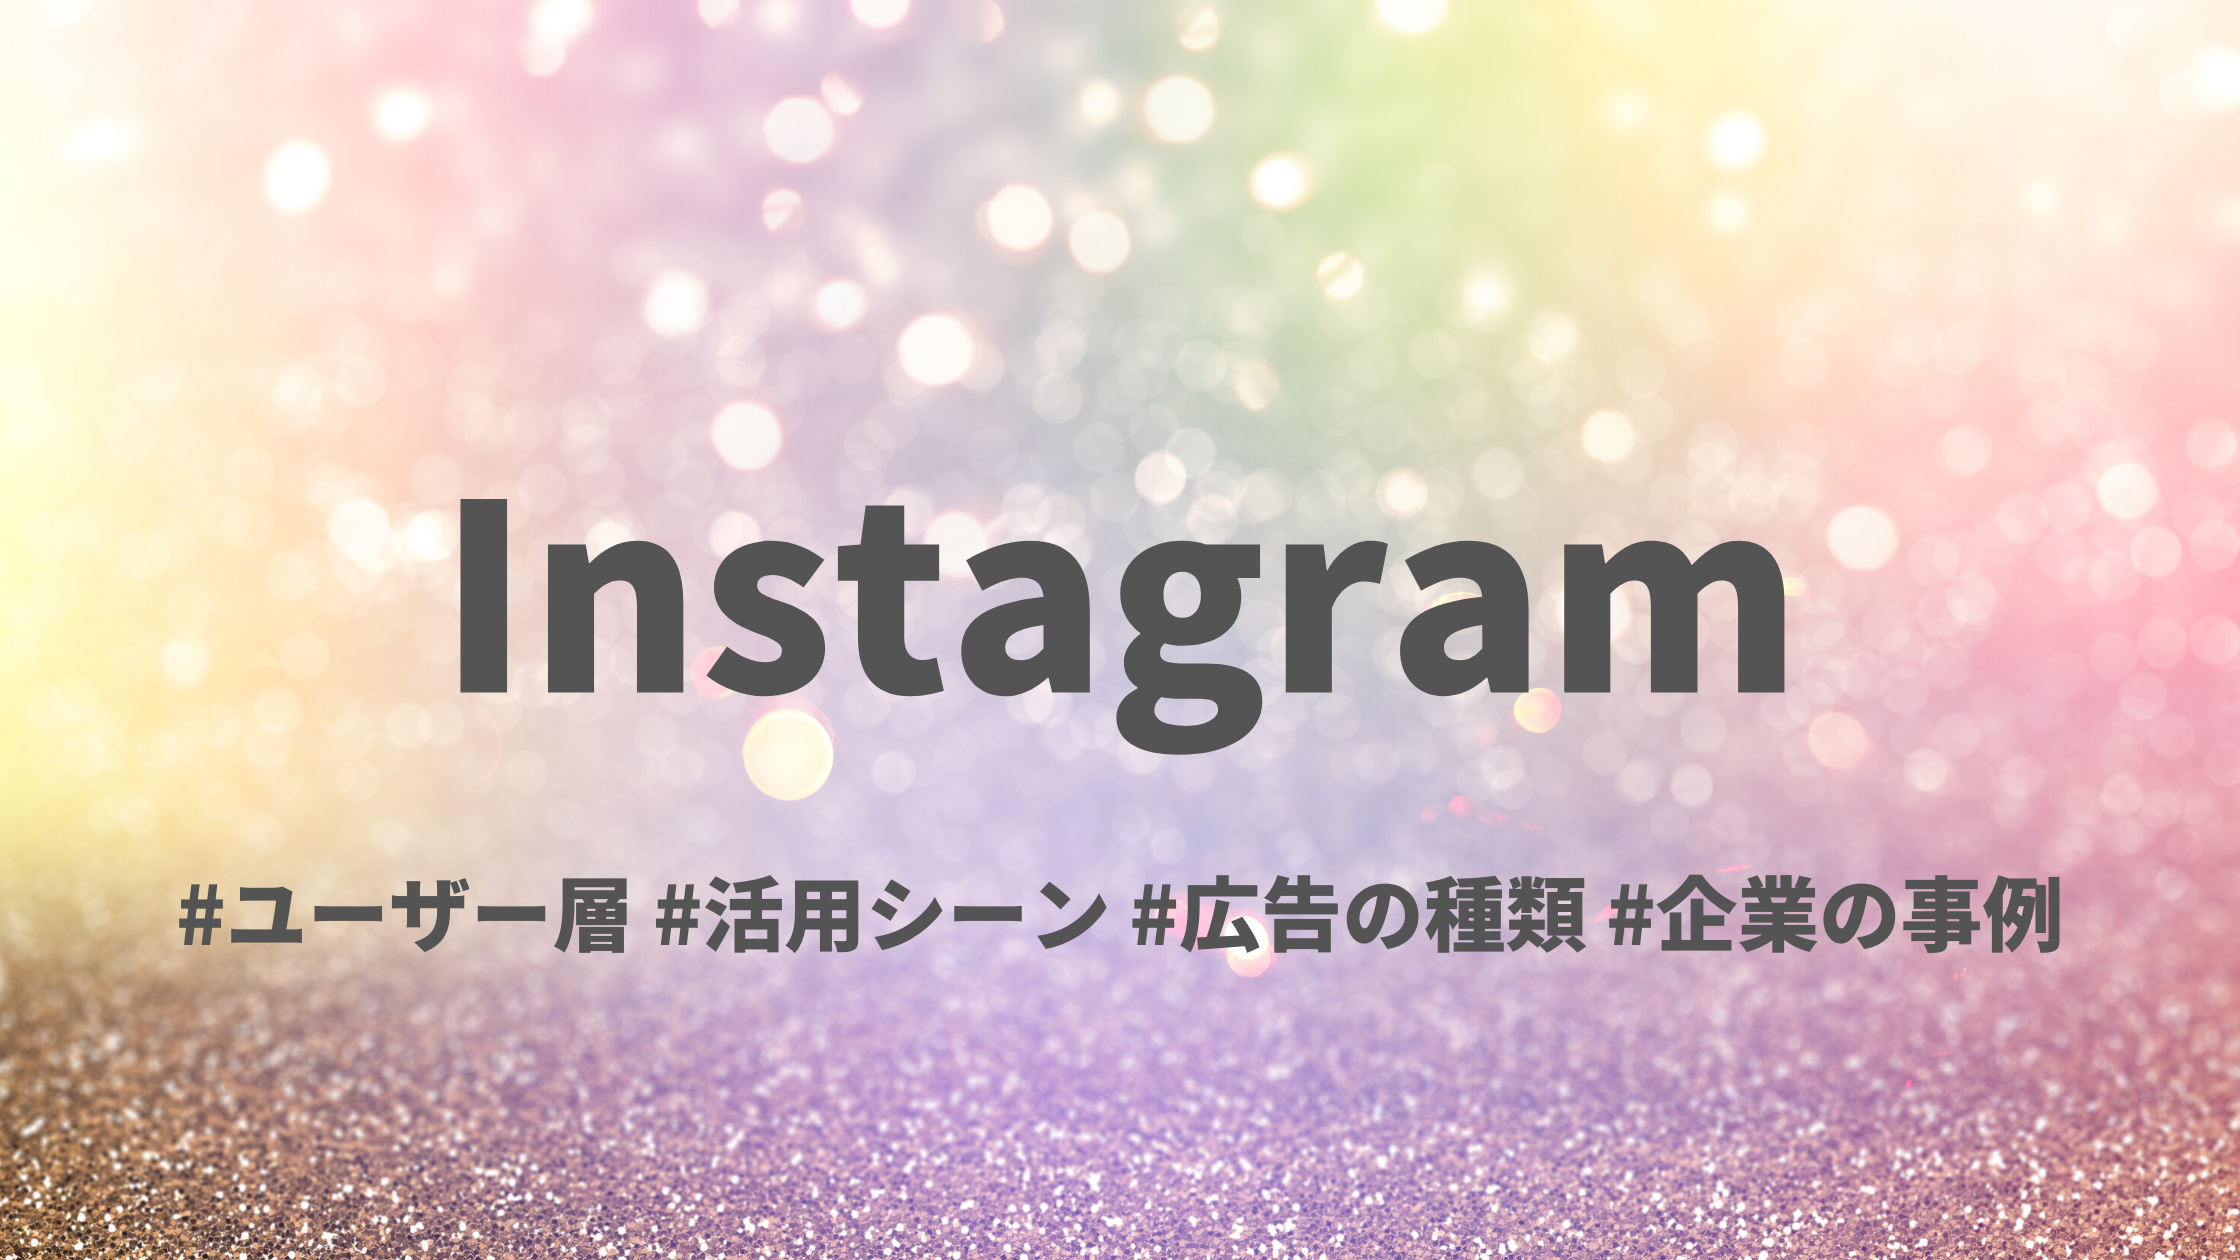 Instagramユーザー数は 日本国内で3,300万人！ 利用者増が続く理由は？ ユーザー層_広告_企業の活用事例も